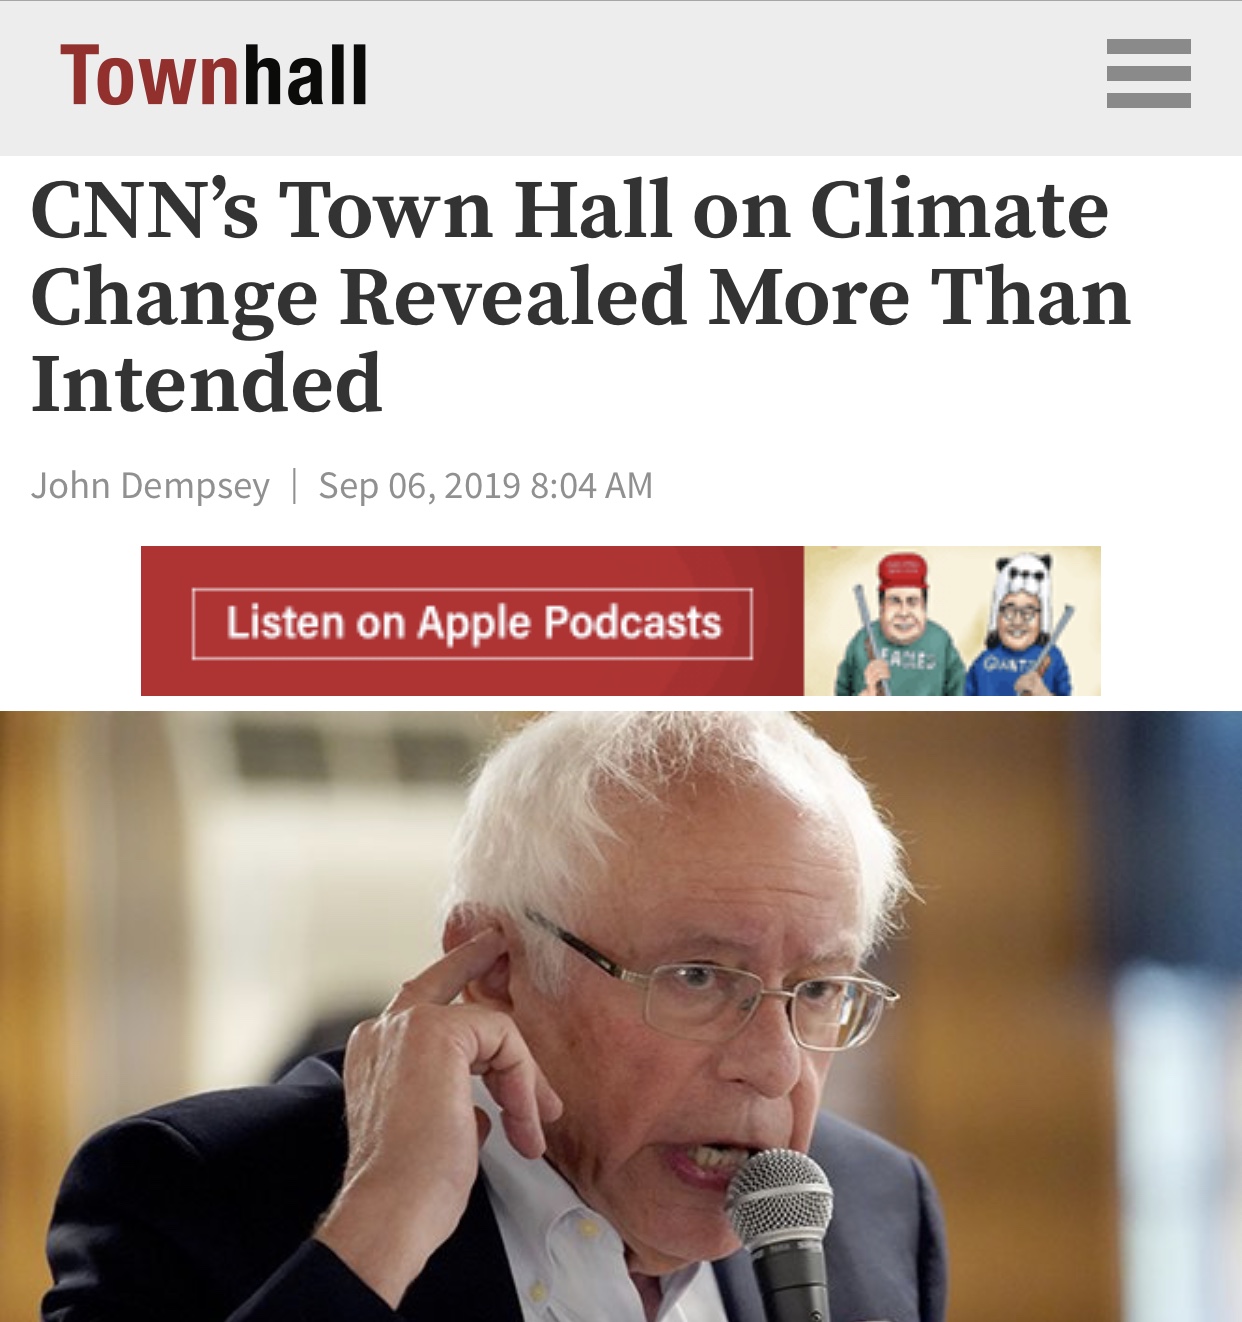 CNN’s Town Hall on Climate Change Revealed More Than Intended